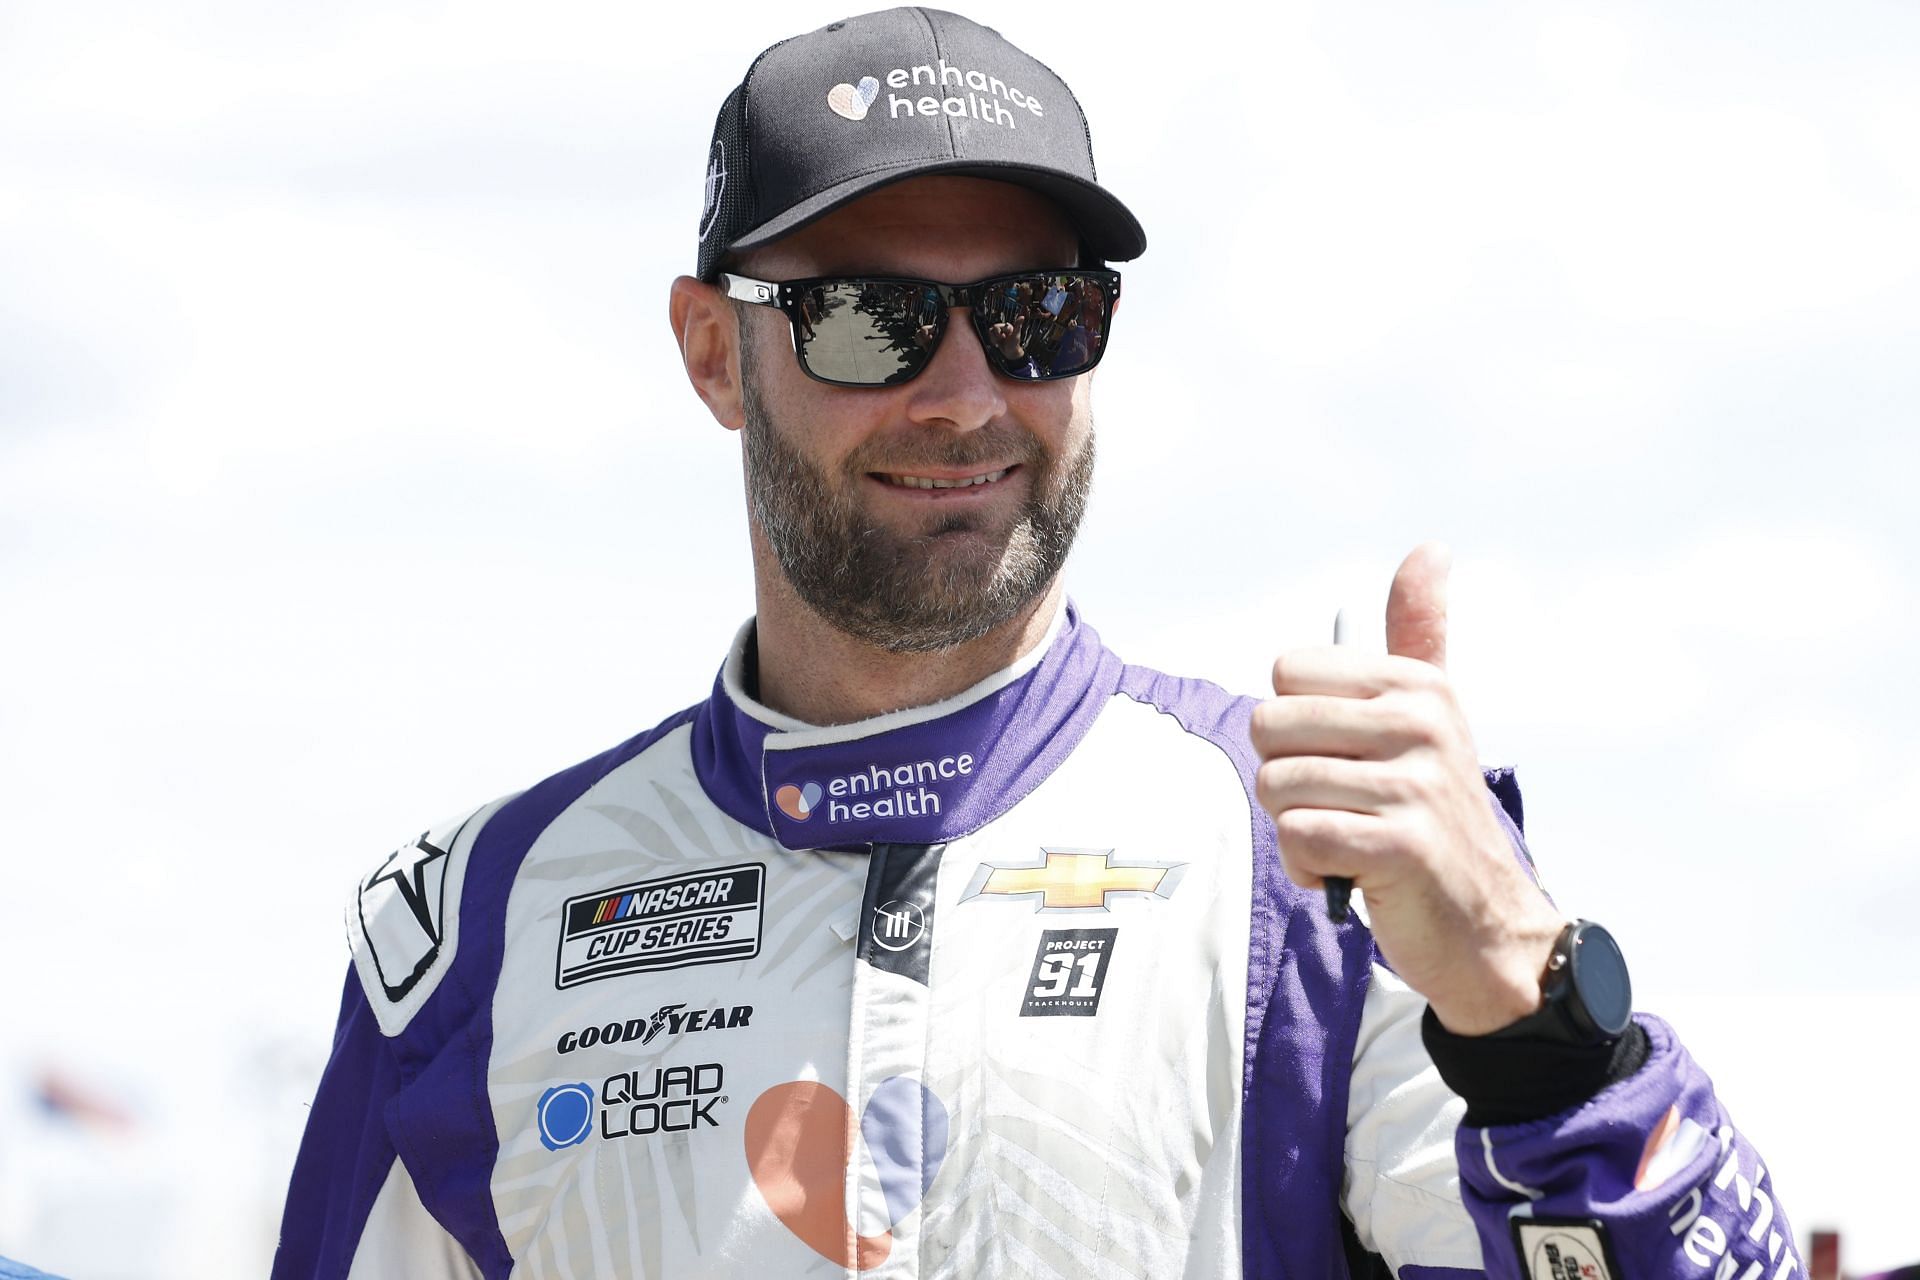 Shane van Gisbergen released from Supercars team but may not drive in Cup Series again until 2024